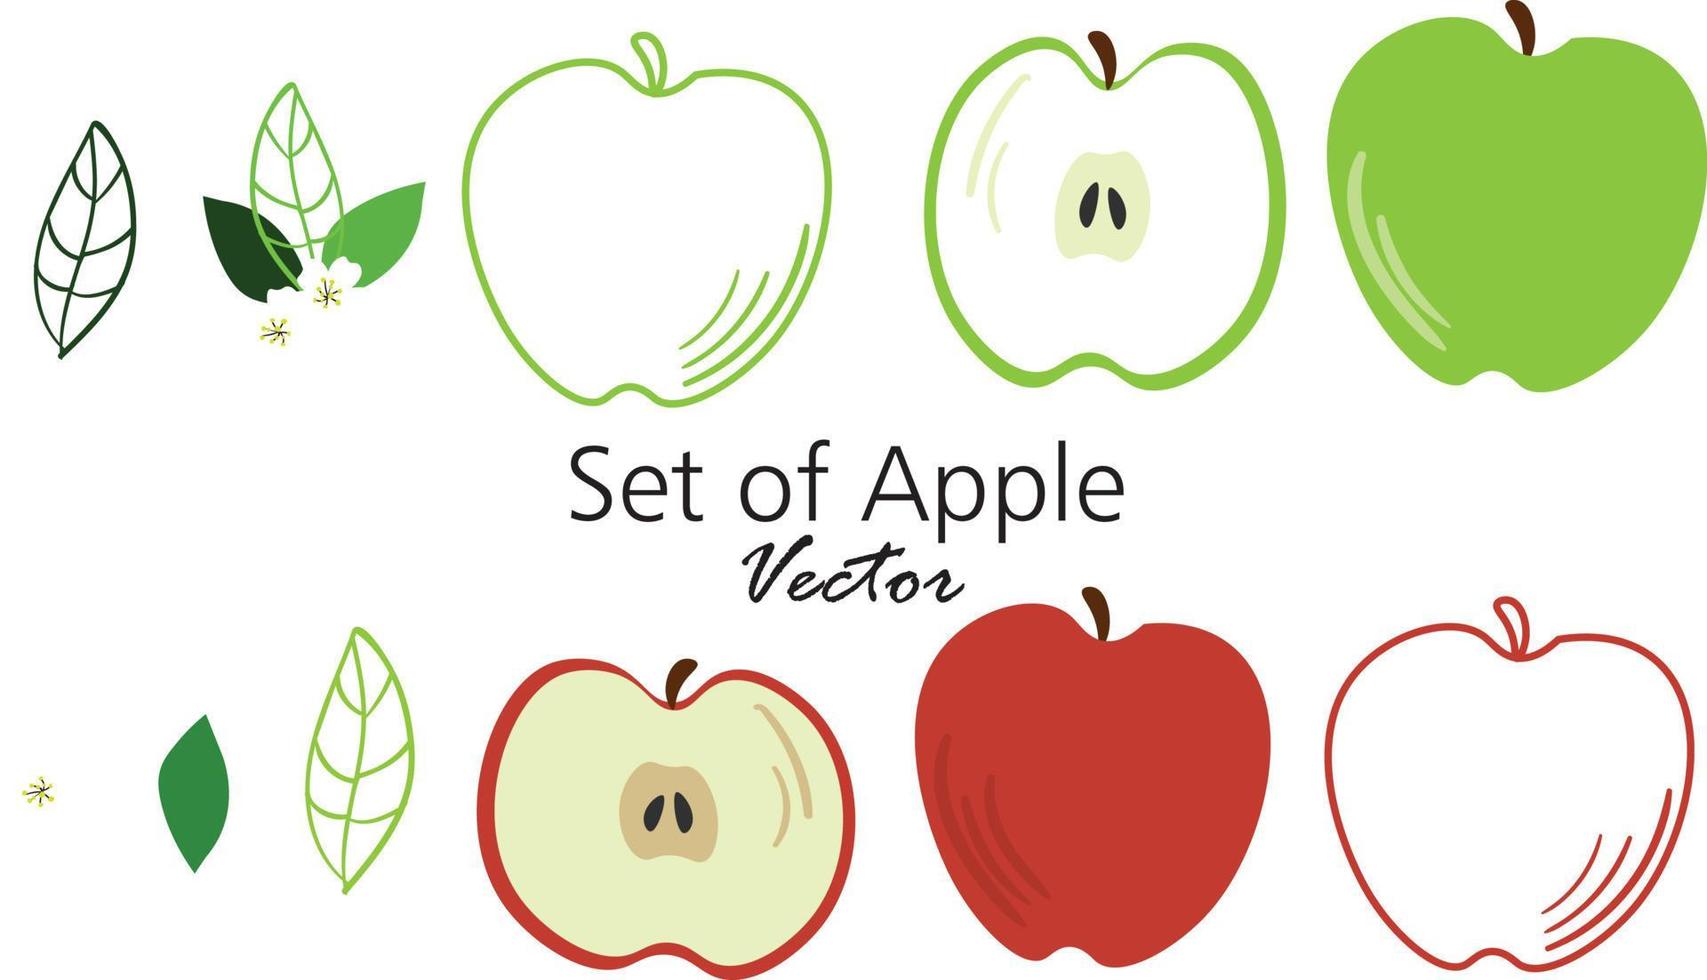 Different colors and parts of apples vector set